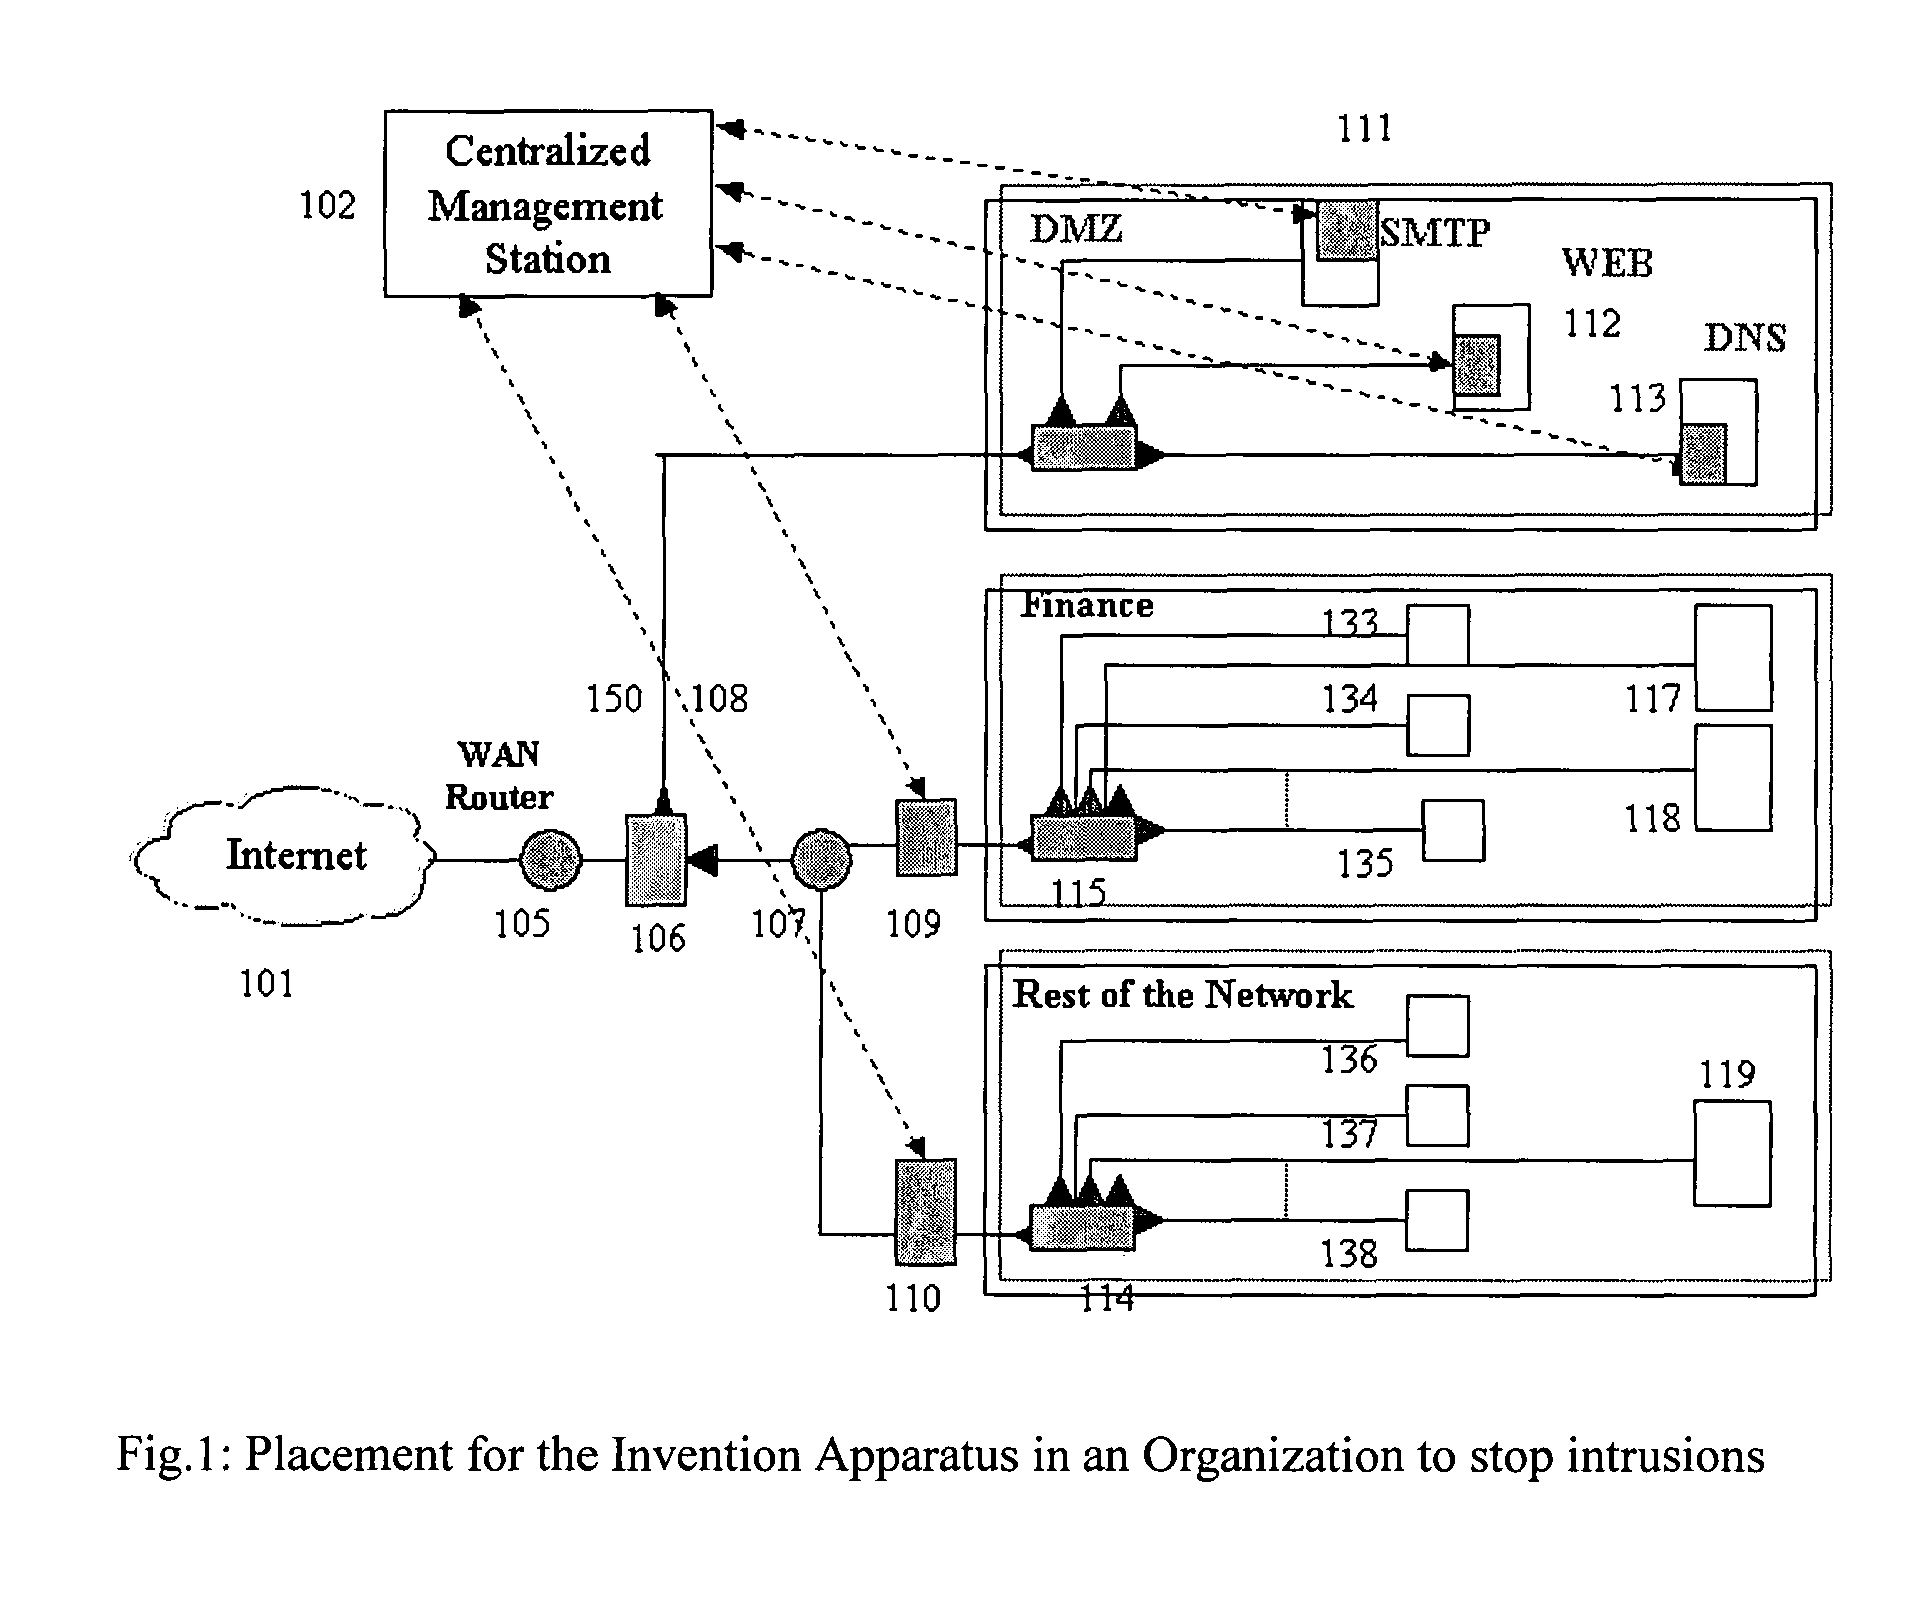 Method and apparatus for the detection and prevention of intrusions, computer worms, and denial of service attacks